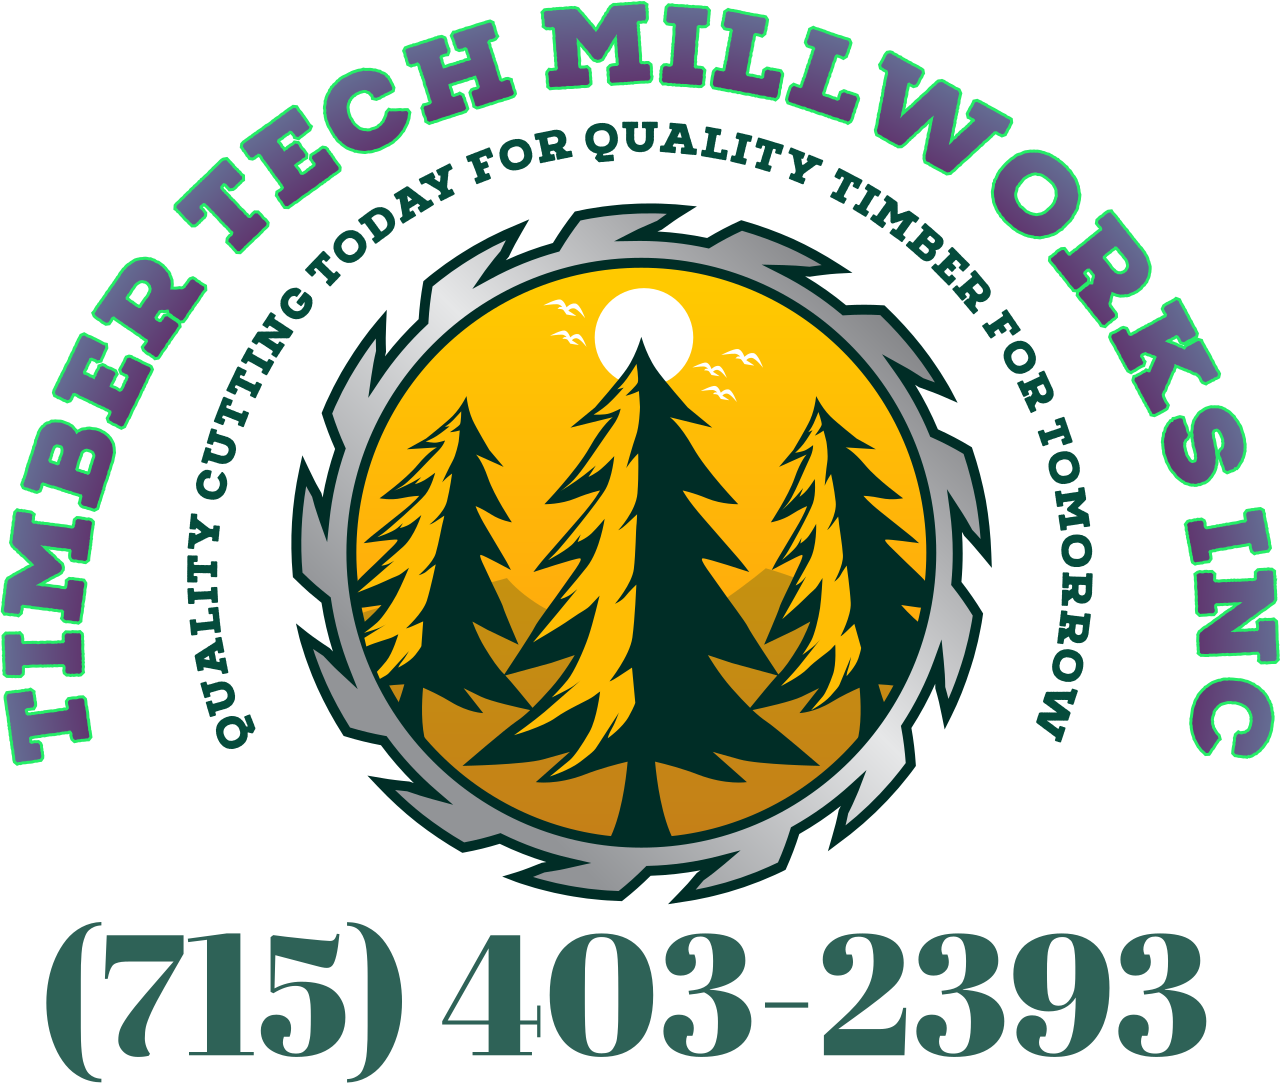 Timber Tech Millworks Inc's logo